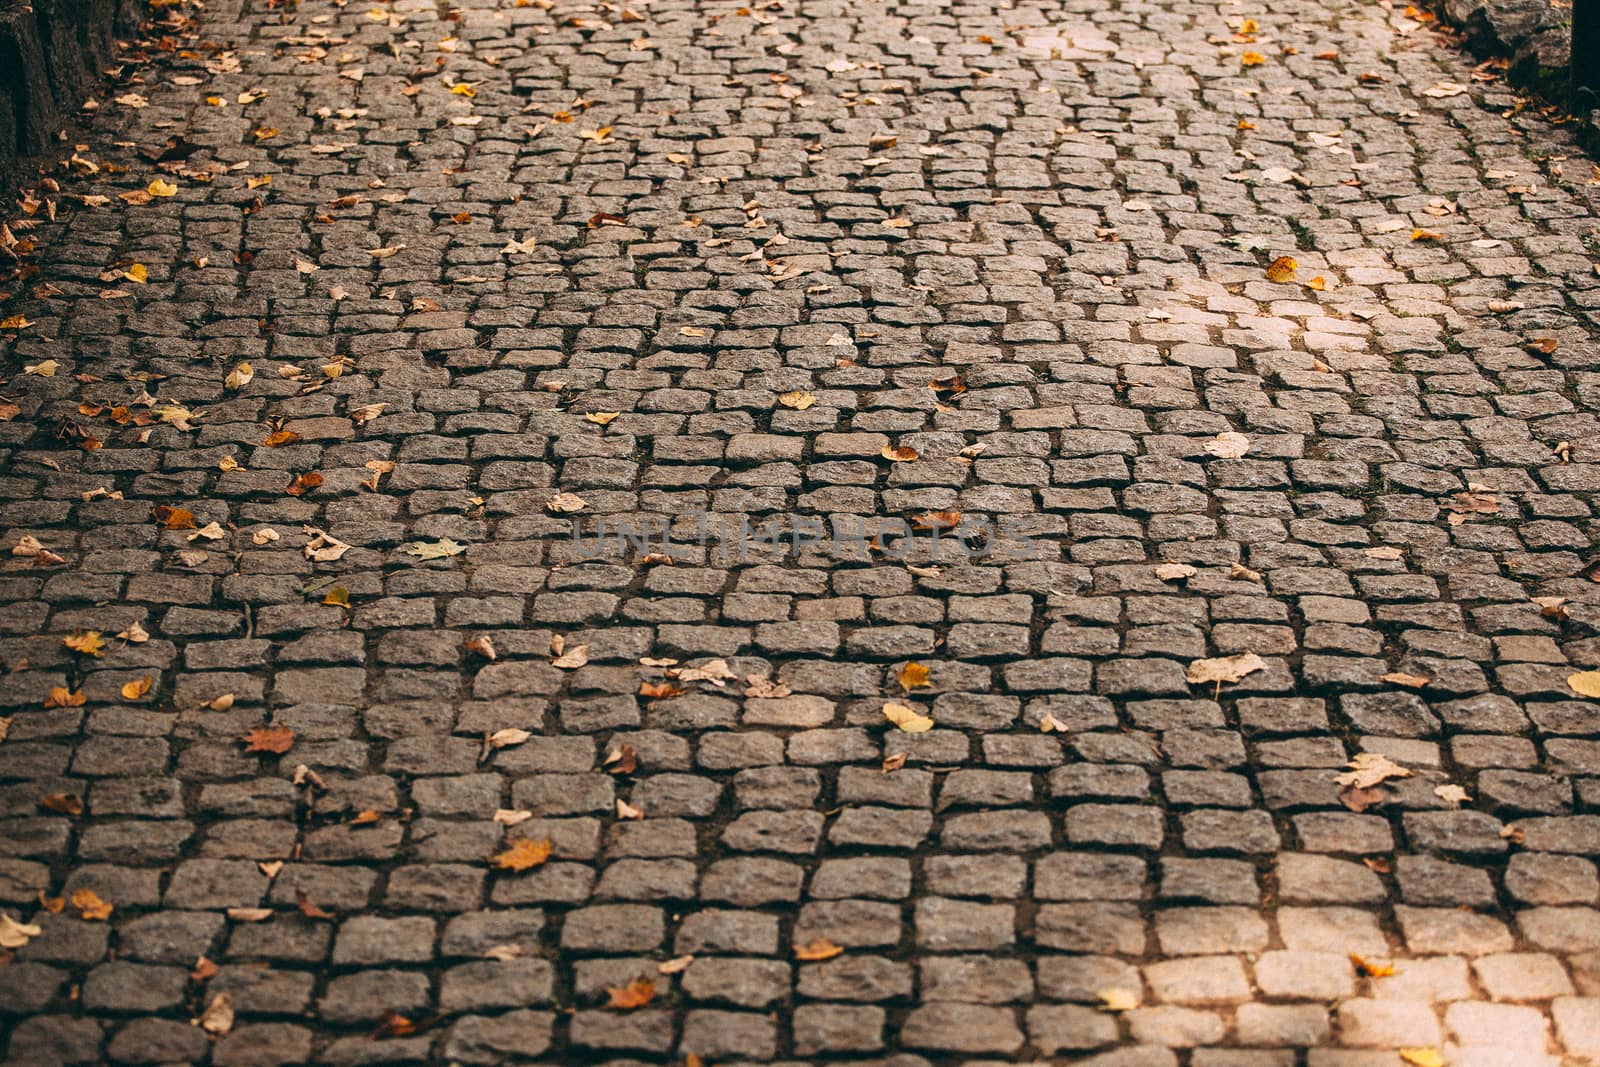 Paving stones in autumn park by Opikanets